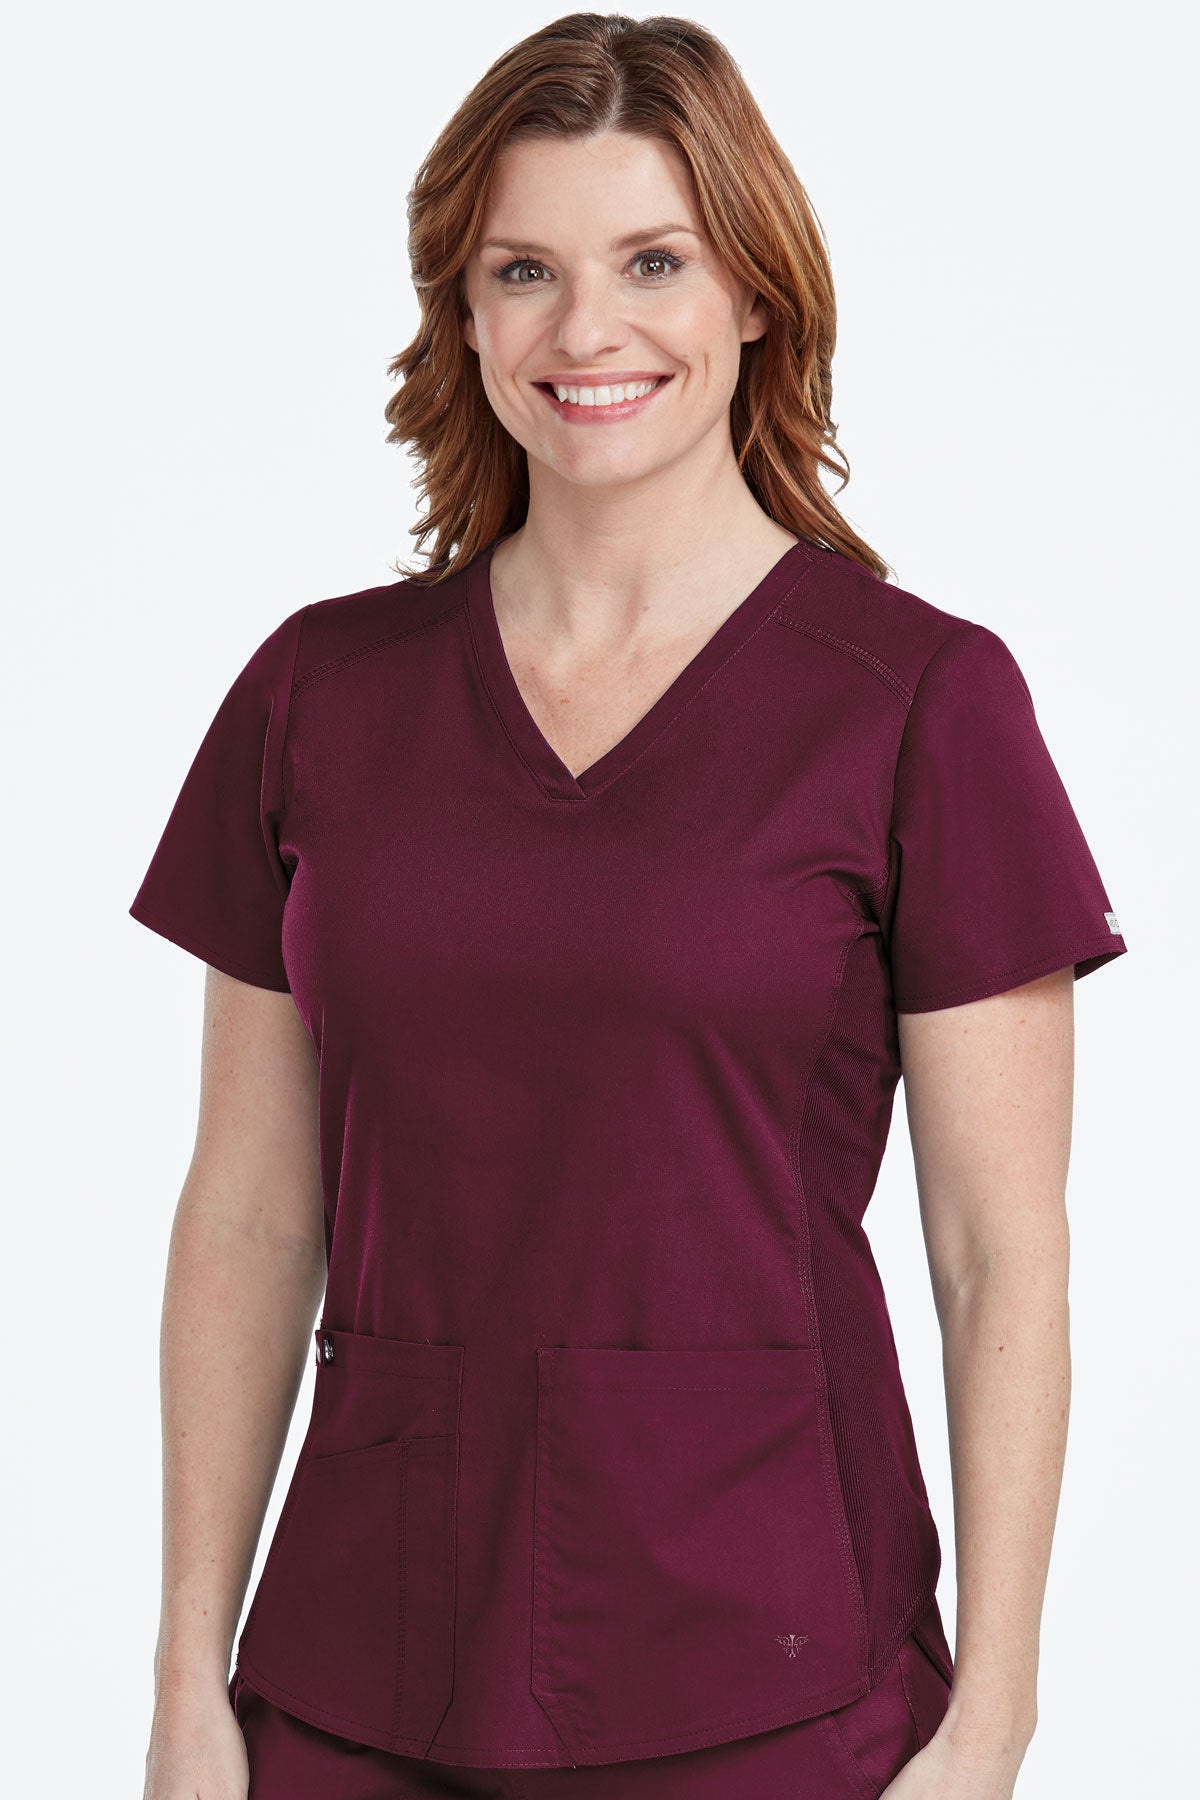 Med Couture V-Neck Shirttail Racerback Top XS-3XL  / Wine